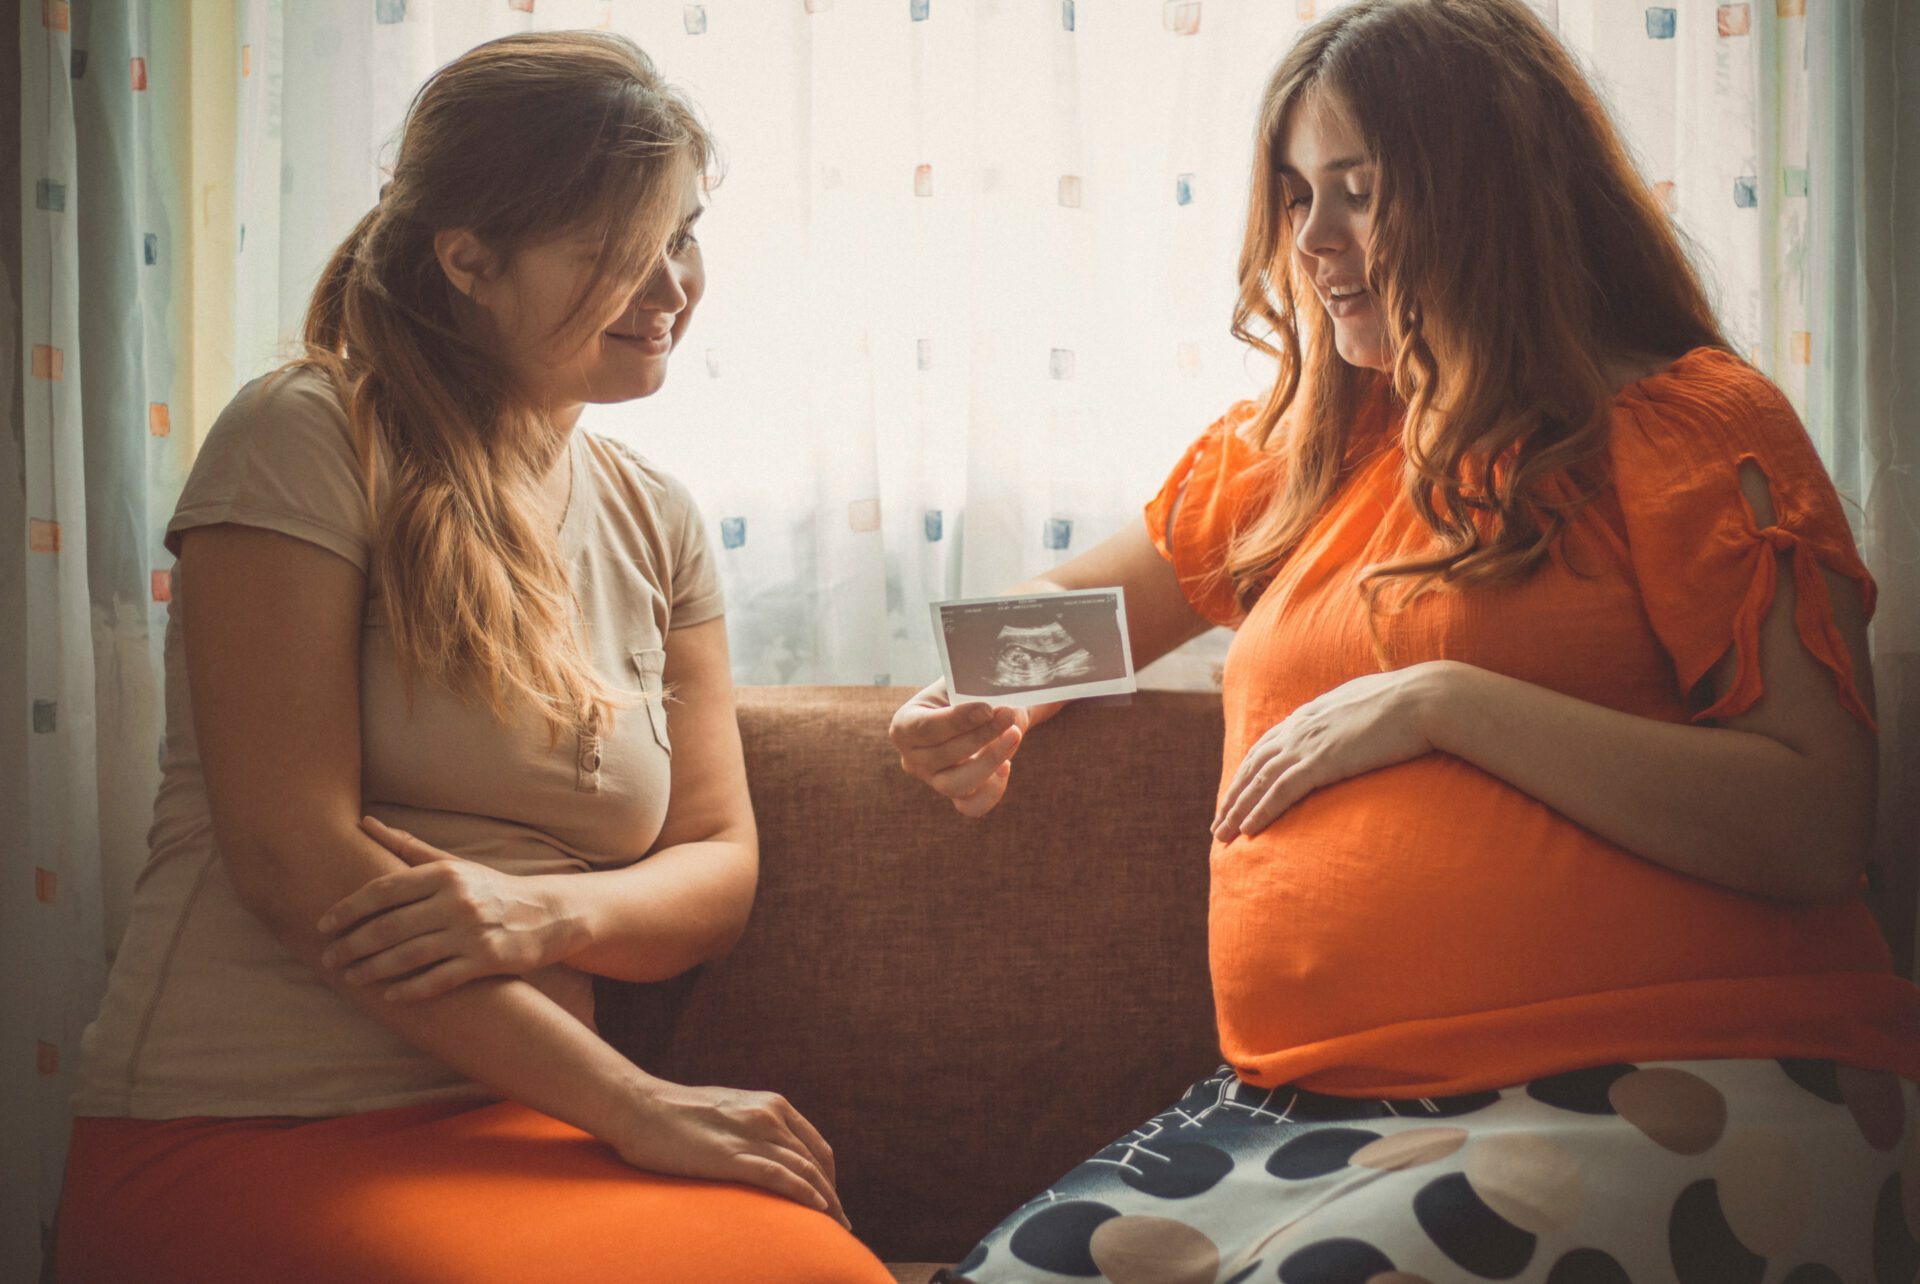 Pregnant woman sitting with female friend and showing photo of ultrasound